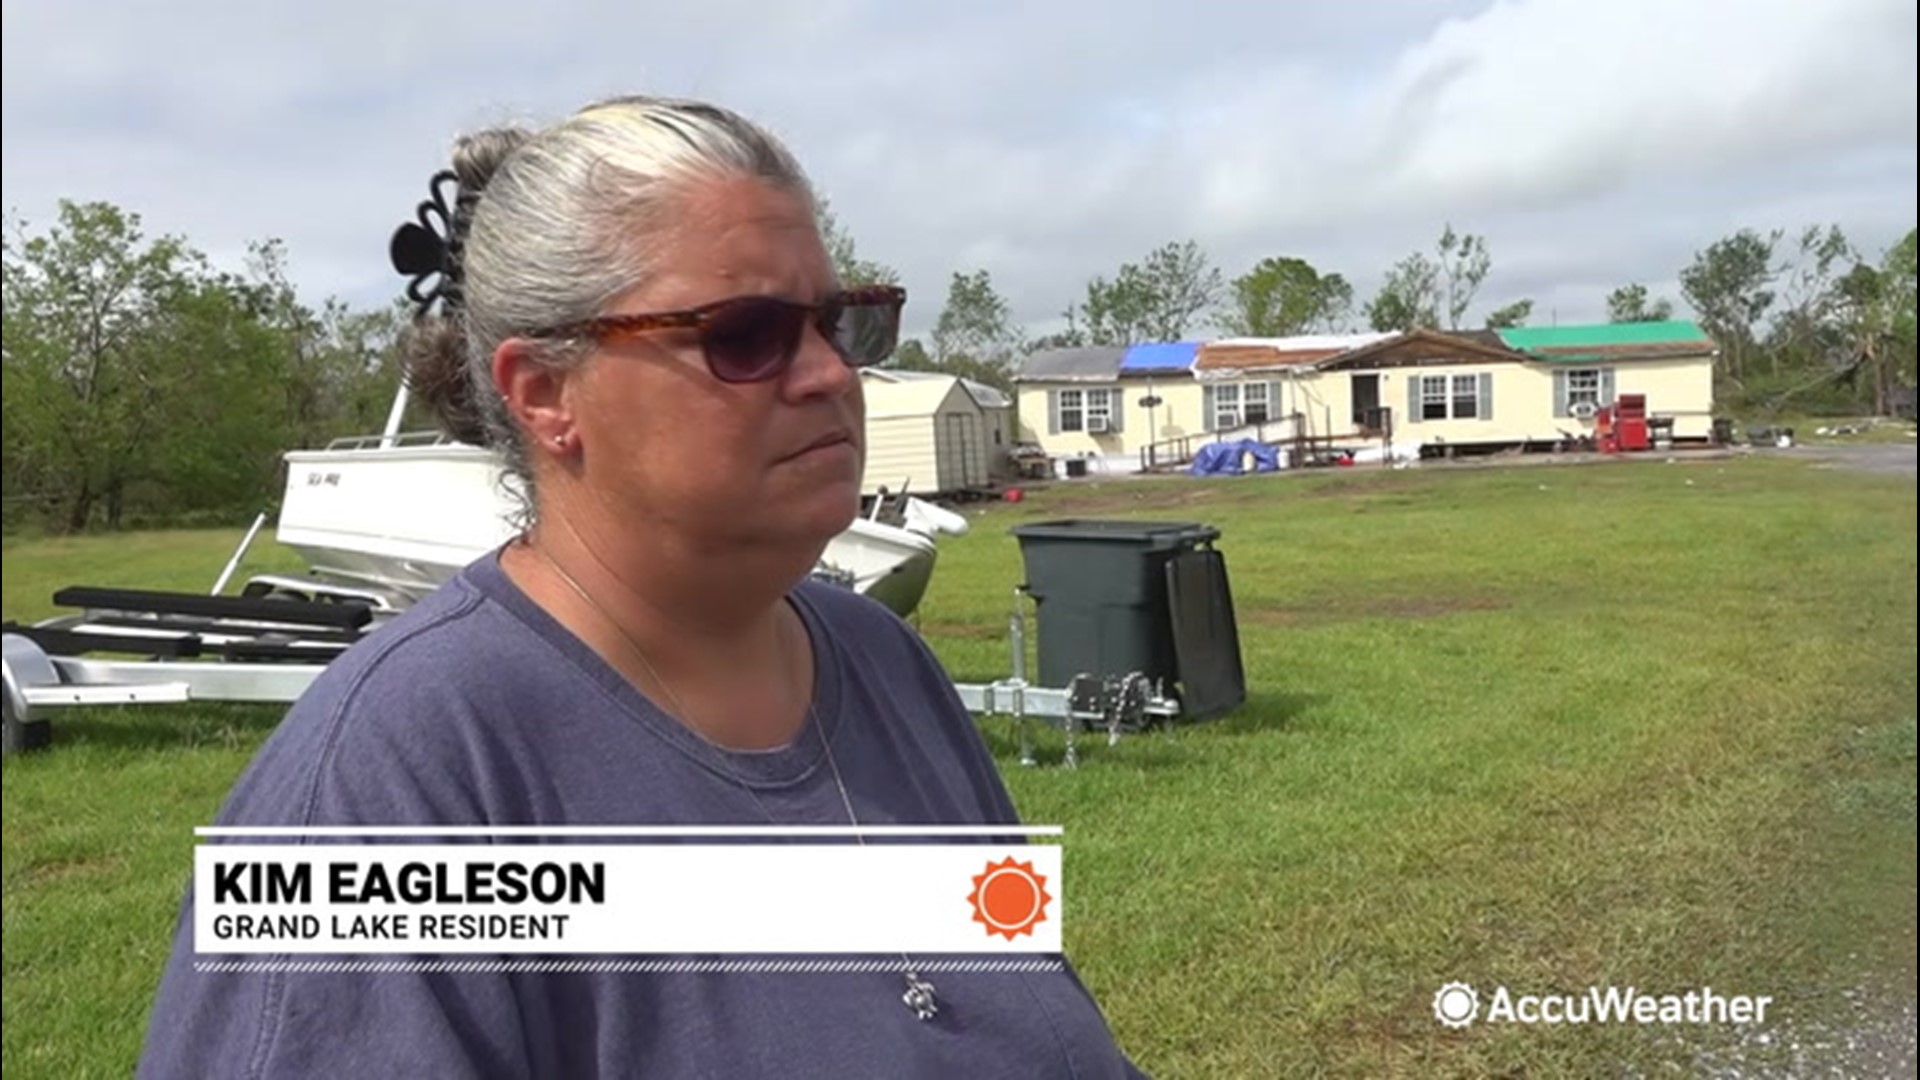 Residents have barely been able to start rebuilding after Hurricane Laura, but they are worried Beta might bring more heartbreak.